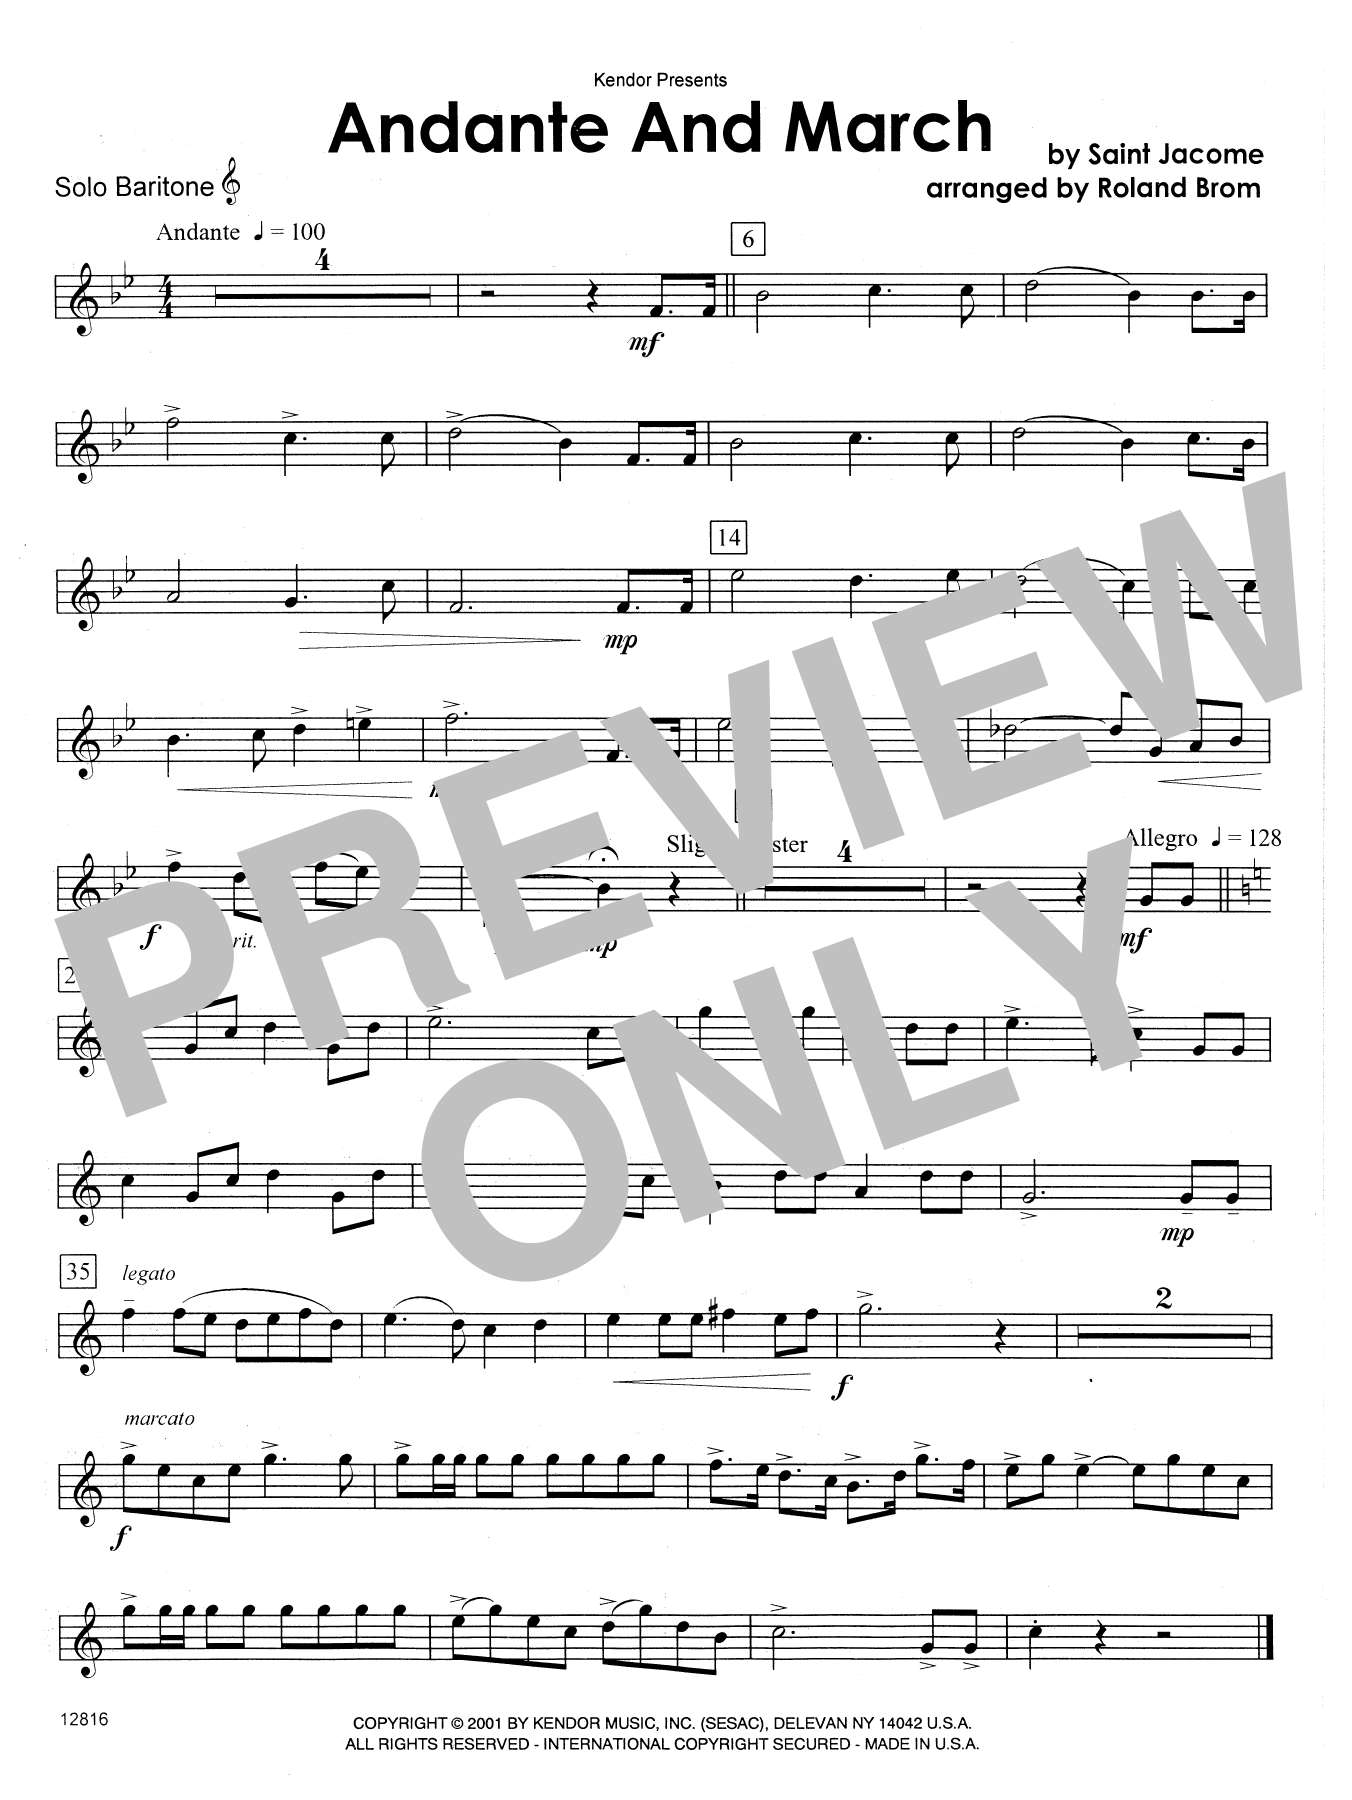 Download Brom Andante And March - Solo Baritone T.C. Sheet Music